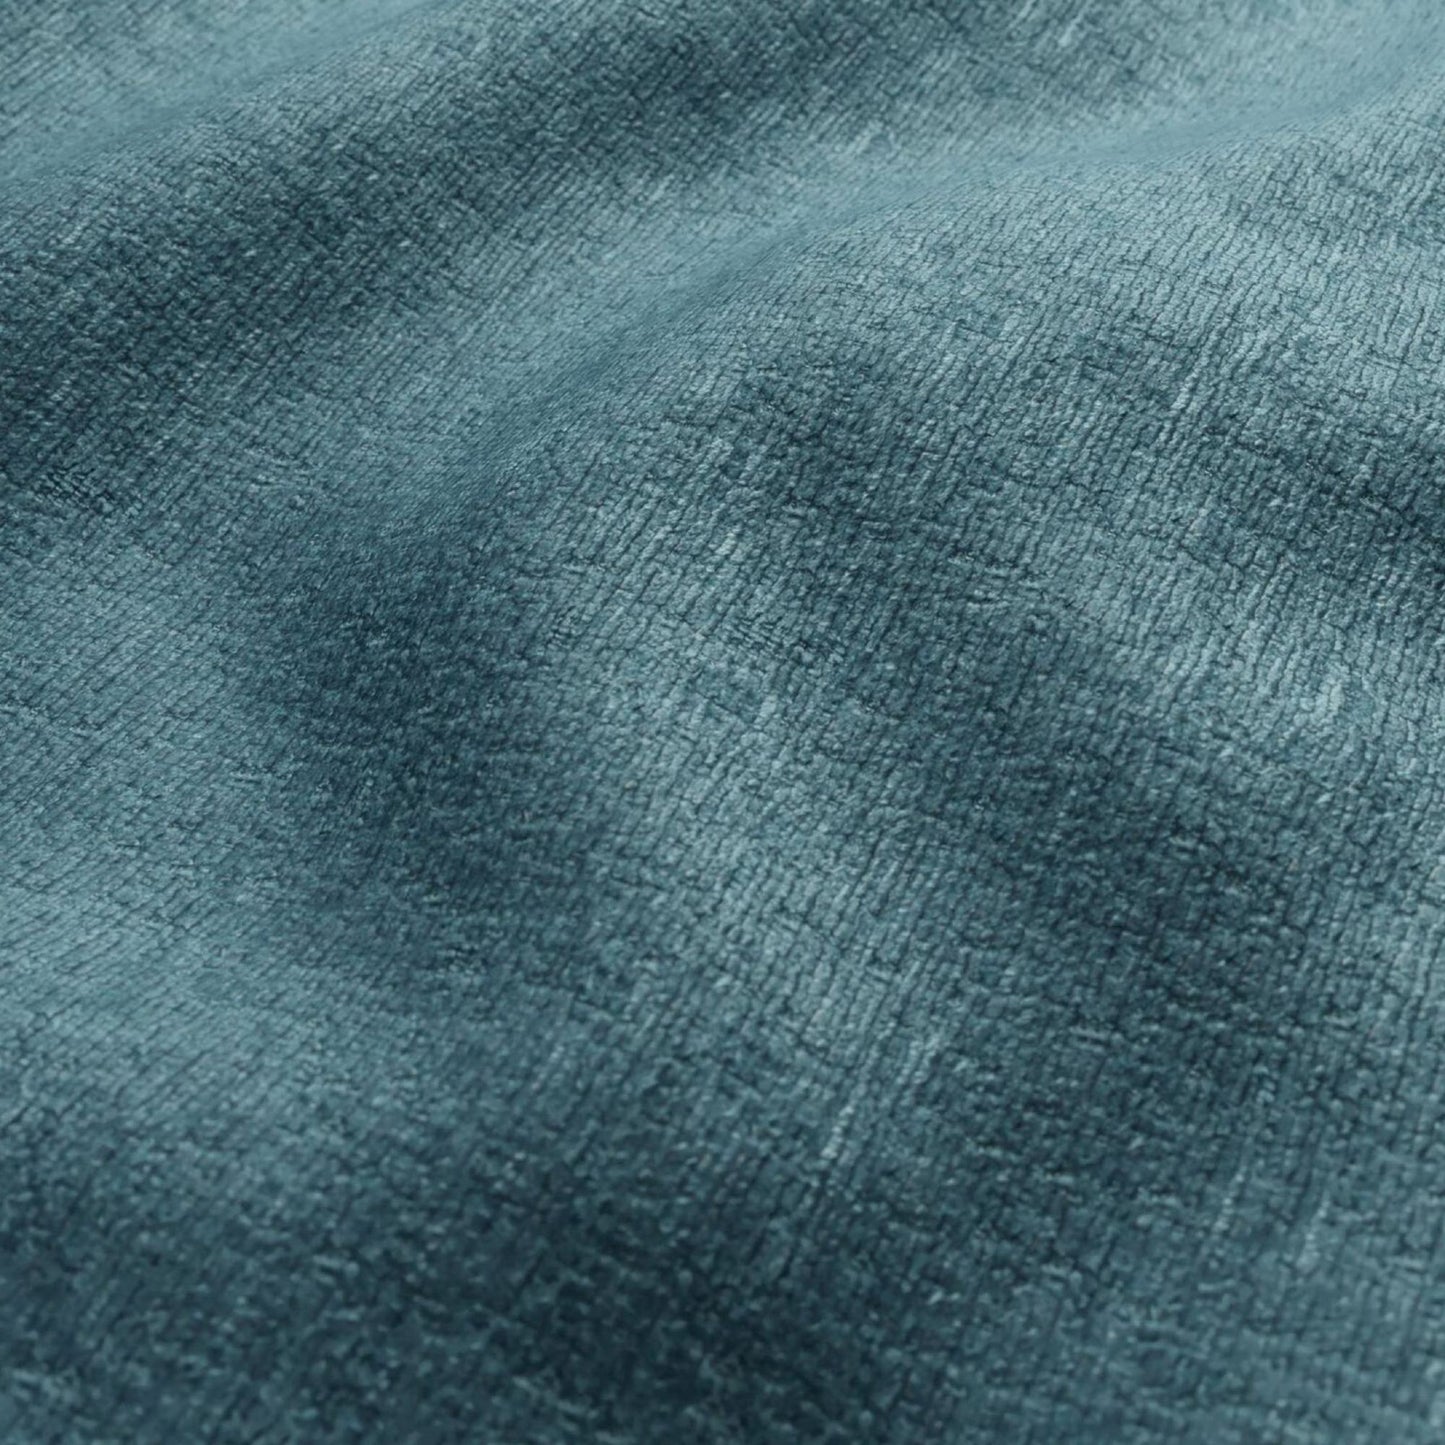 MONSIEUR HYDRO LUXURY CHENILLE FABRIC SAMPLE | SPECIAL COLLECTION | # 2